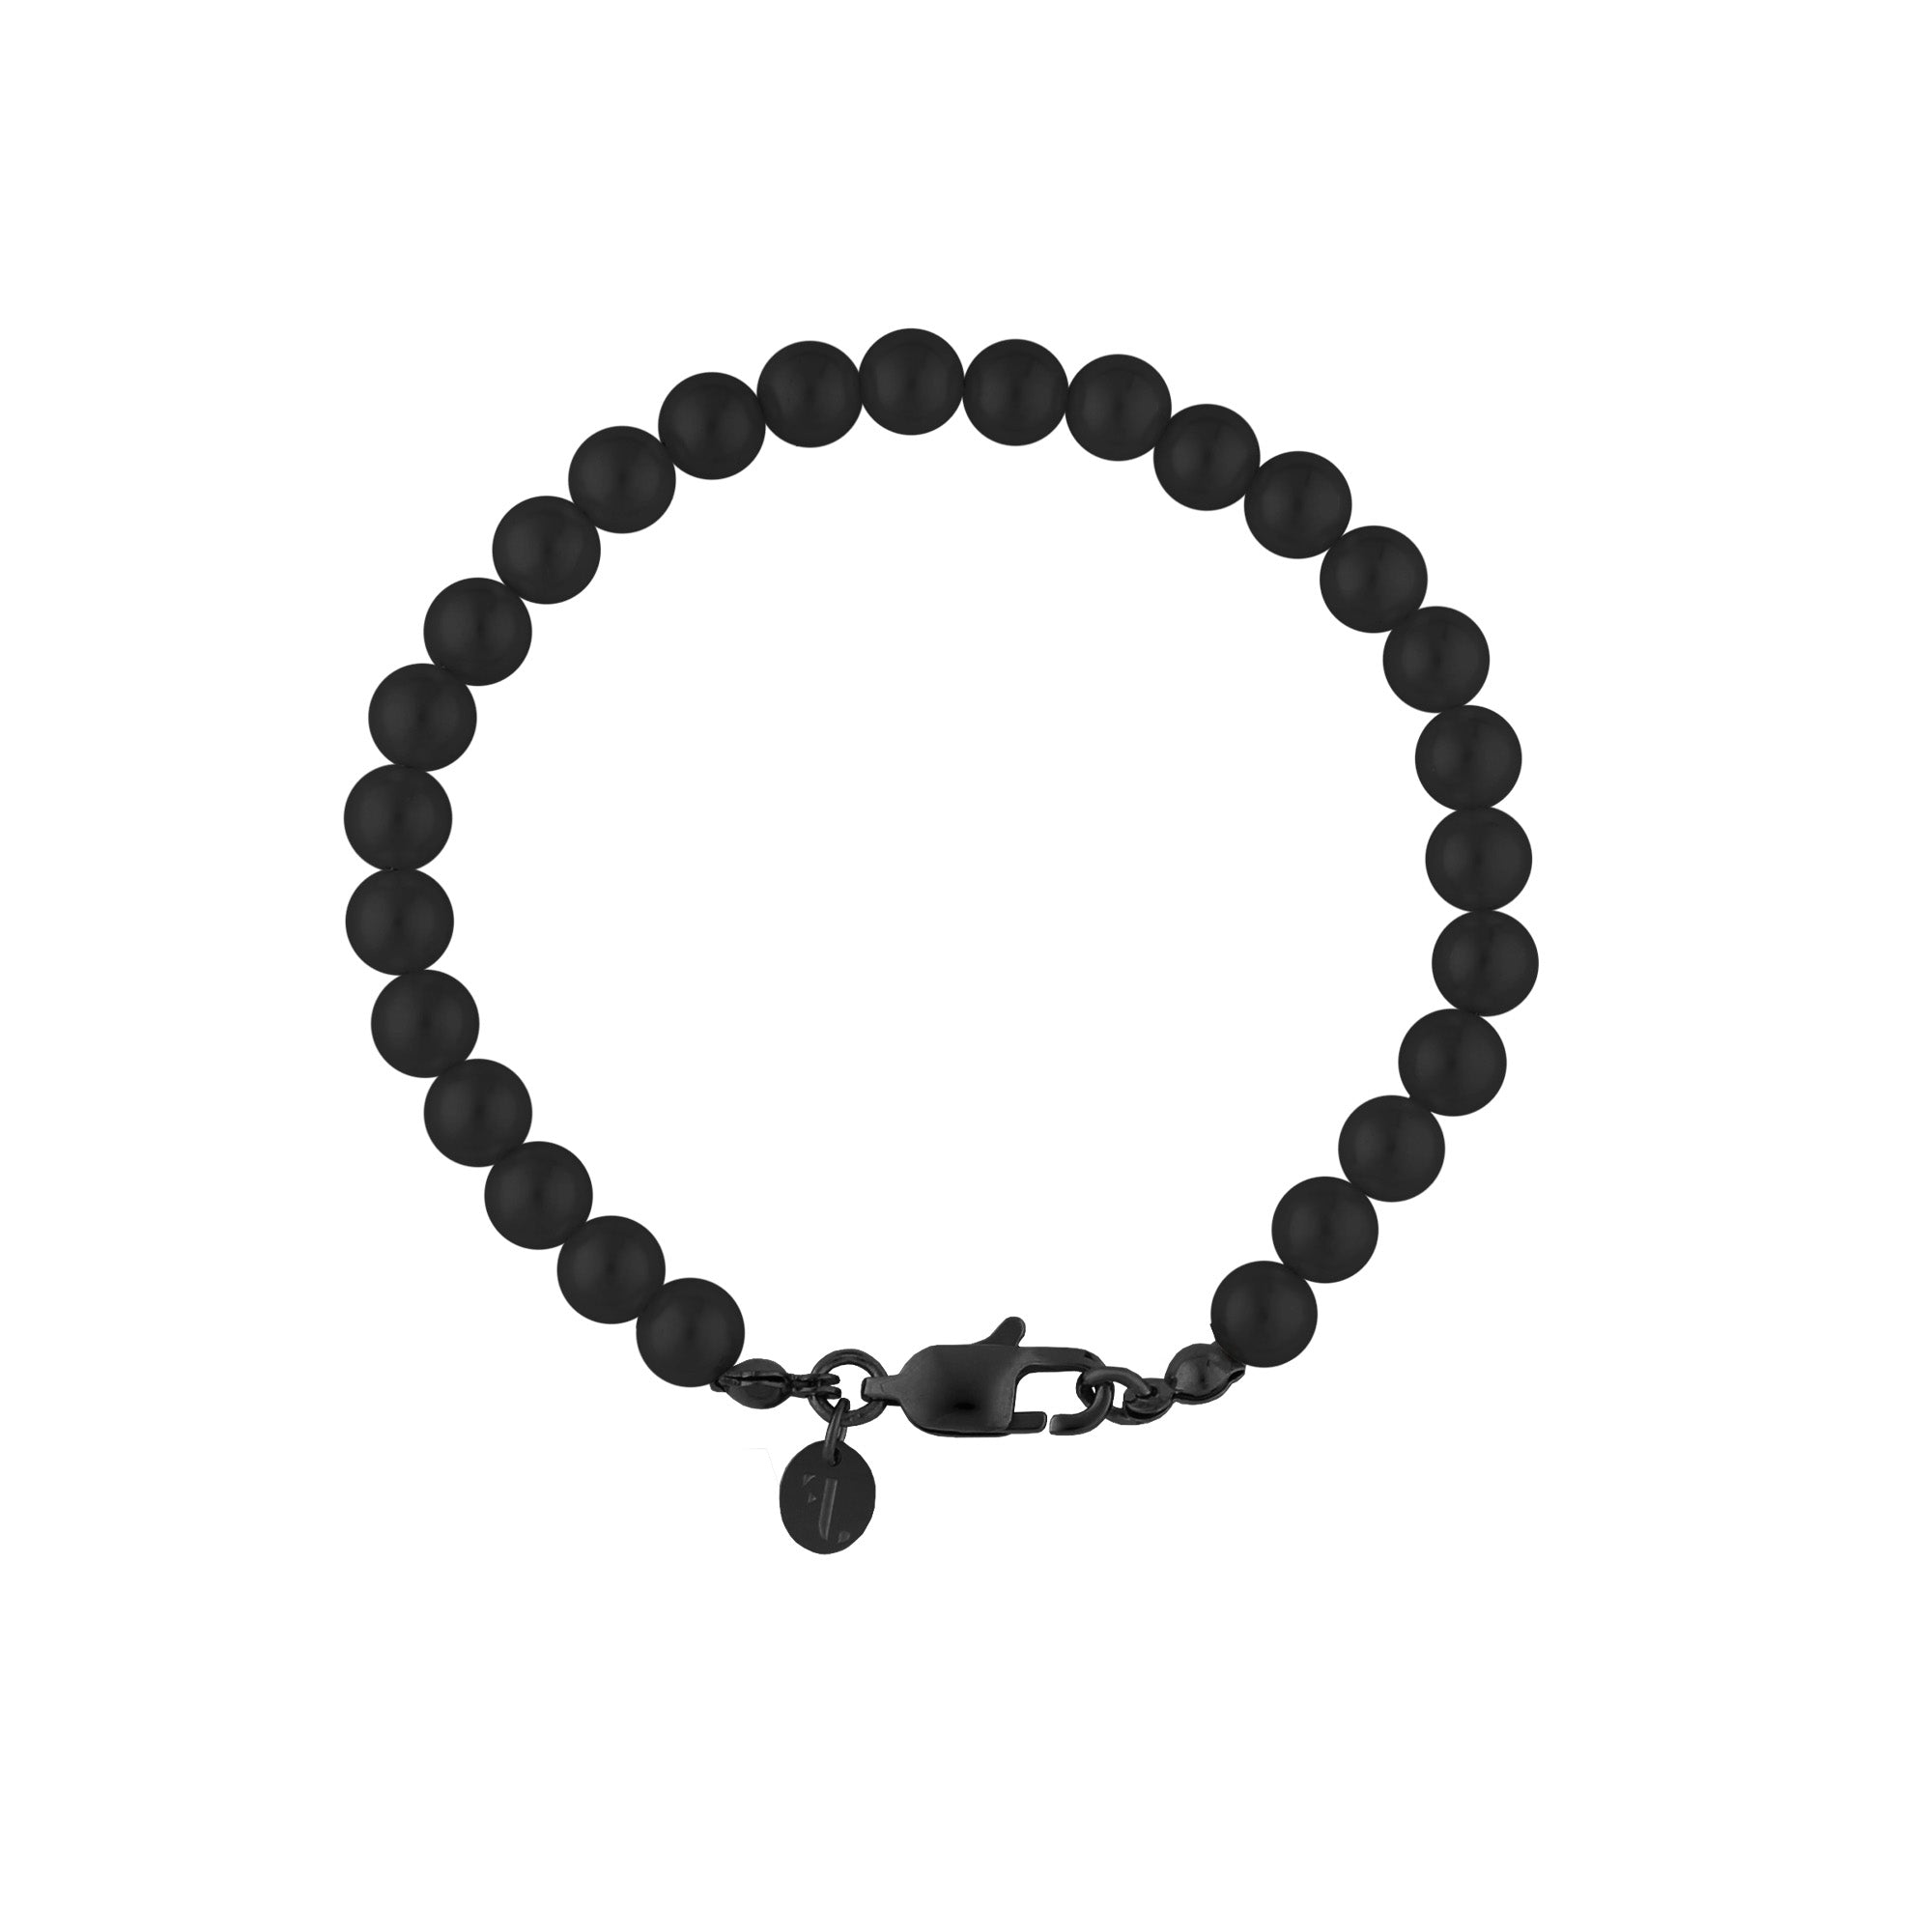 Dark Var women's bracelet by Five Jwlry, crafted with black onyx beads and a black stainless steel buckle. Available in sizes 17cm and 20cm. Made from water-resistant 316L stainless steel. Hypoallergenic with a 2-year warranty.